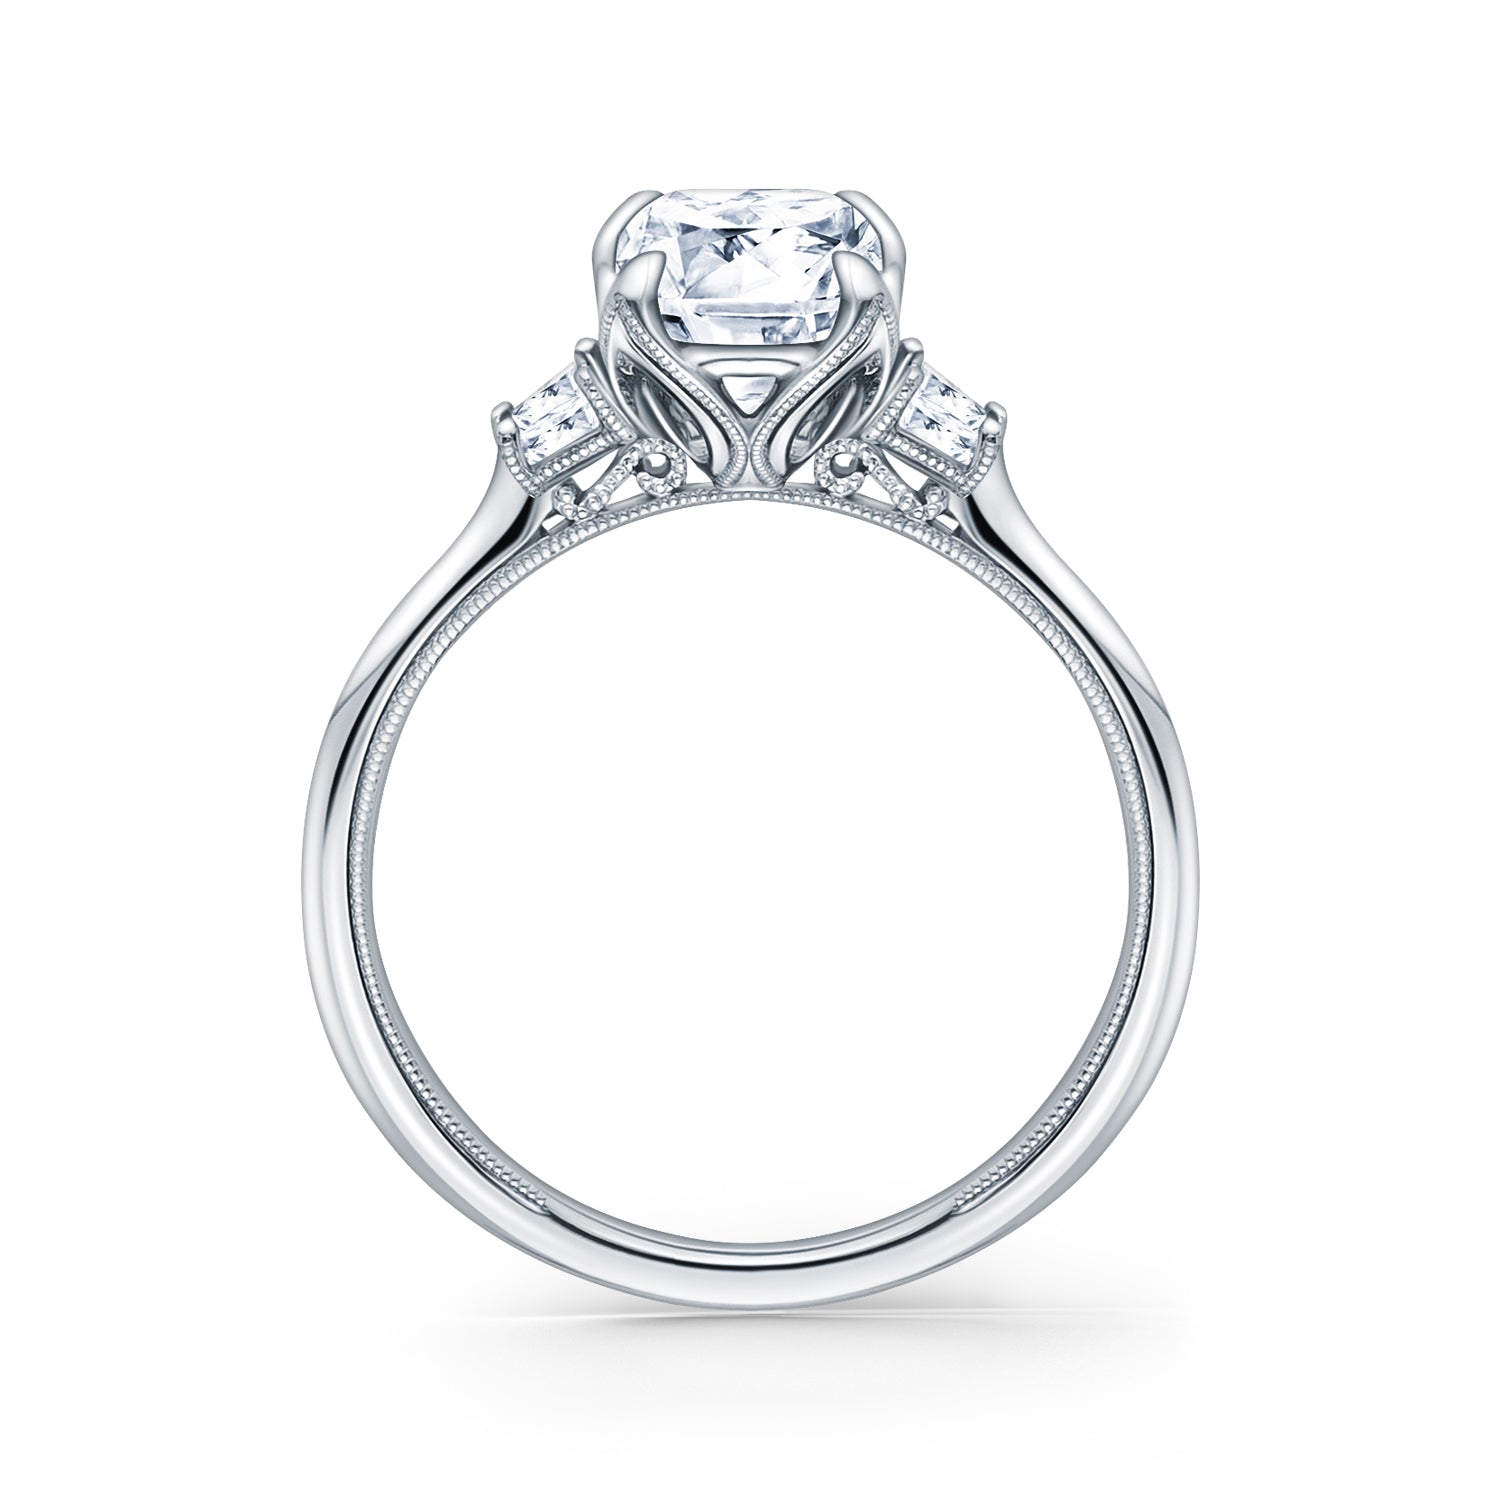 Pin on || solitaire engagement rings ||